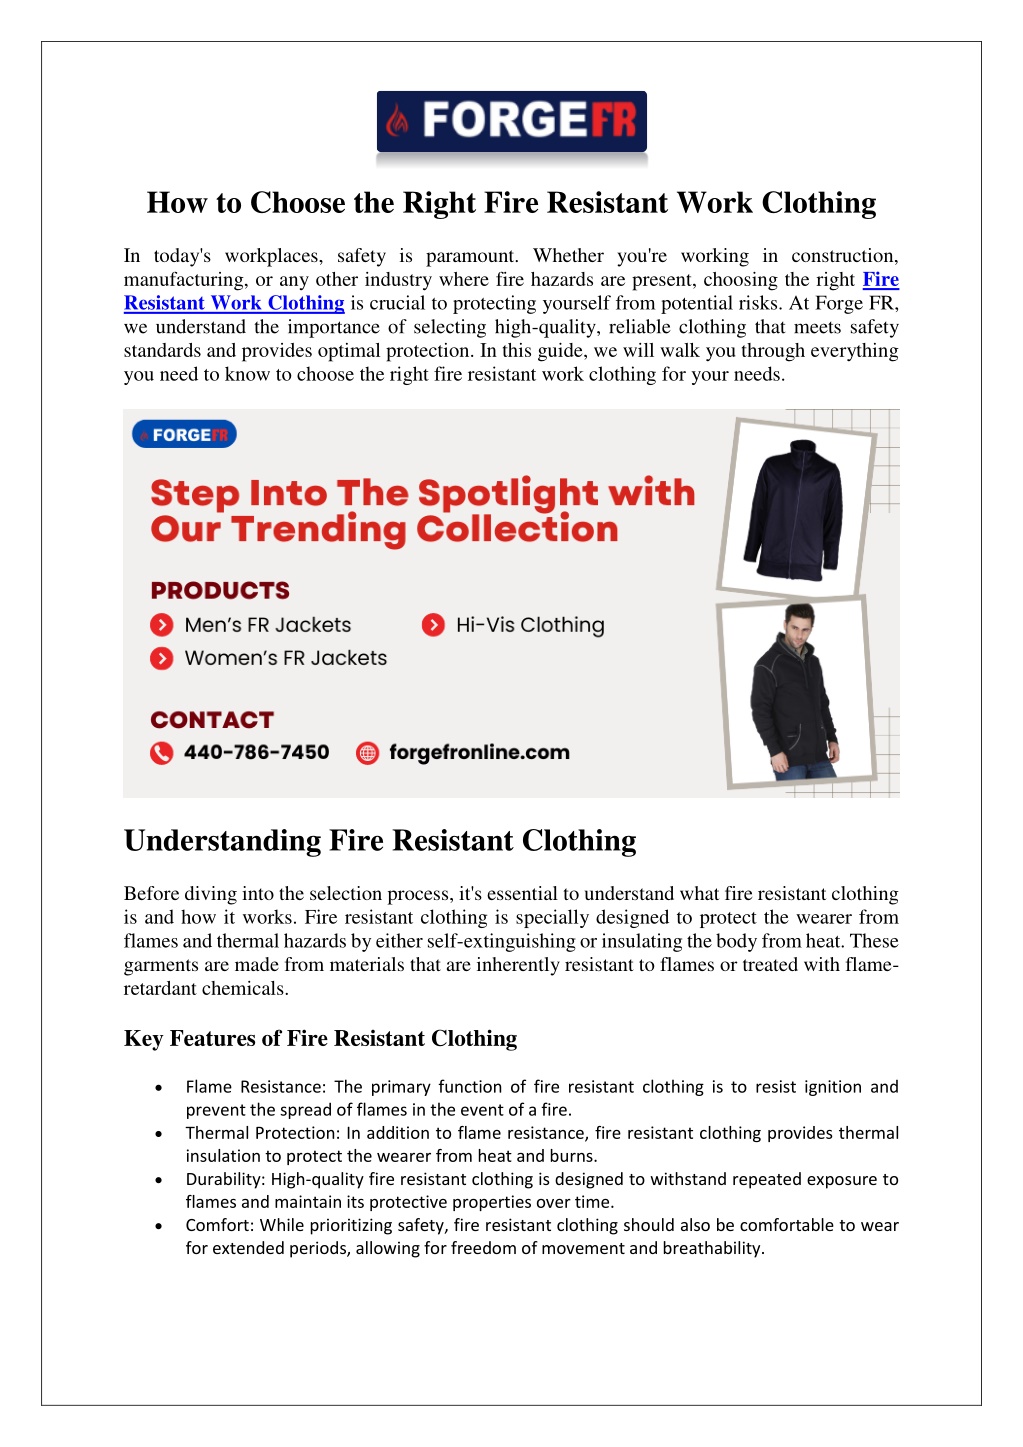 PPT - How to Choose the Right Fire Resistant Work Clothing PowerPoint ...